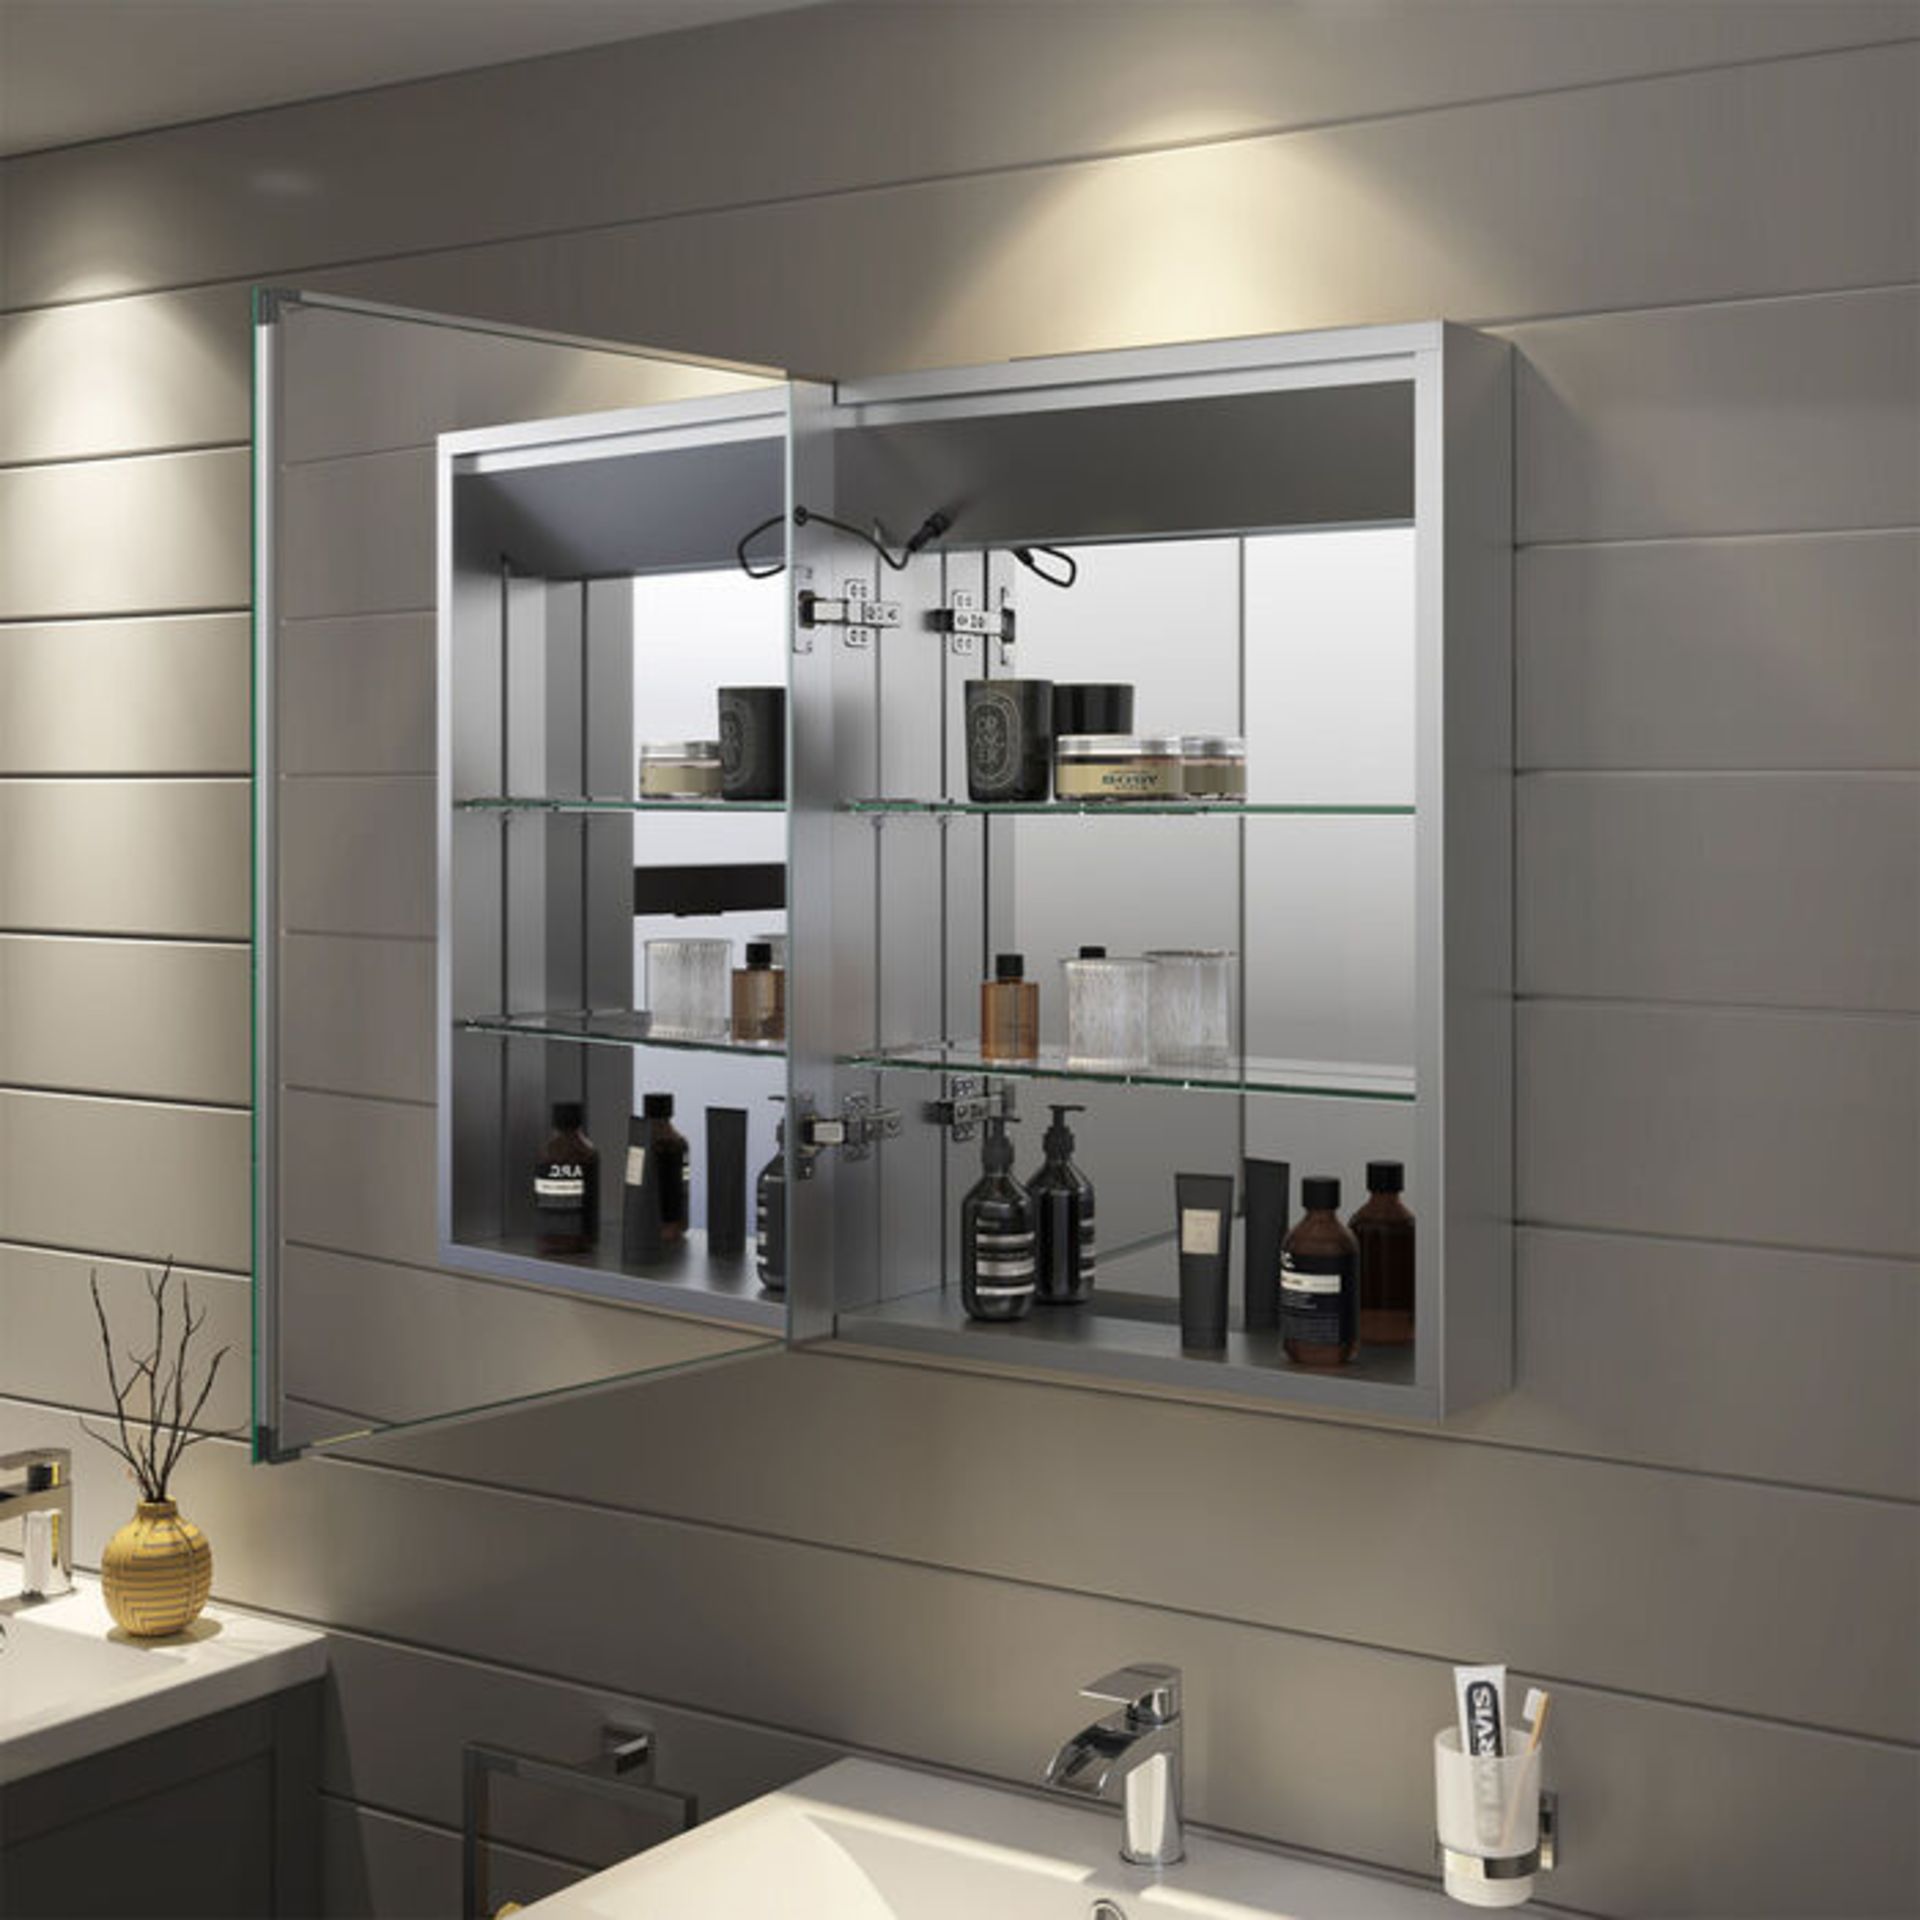 (PC35) 500x700mm Nova Illuminated LED Mirror Cabinet - RRP £569.99 Looking for a mirror cabin...( - Image 2 of 3